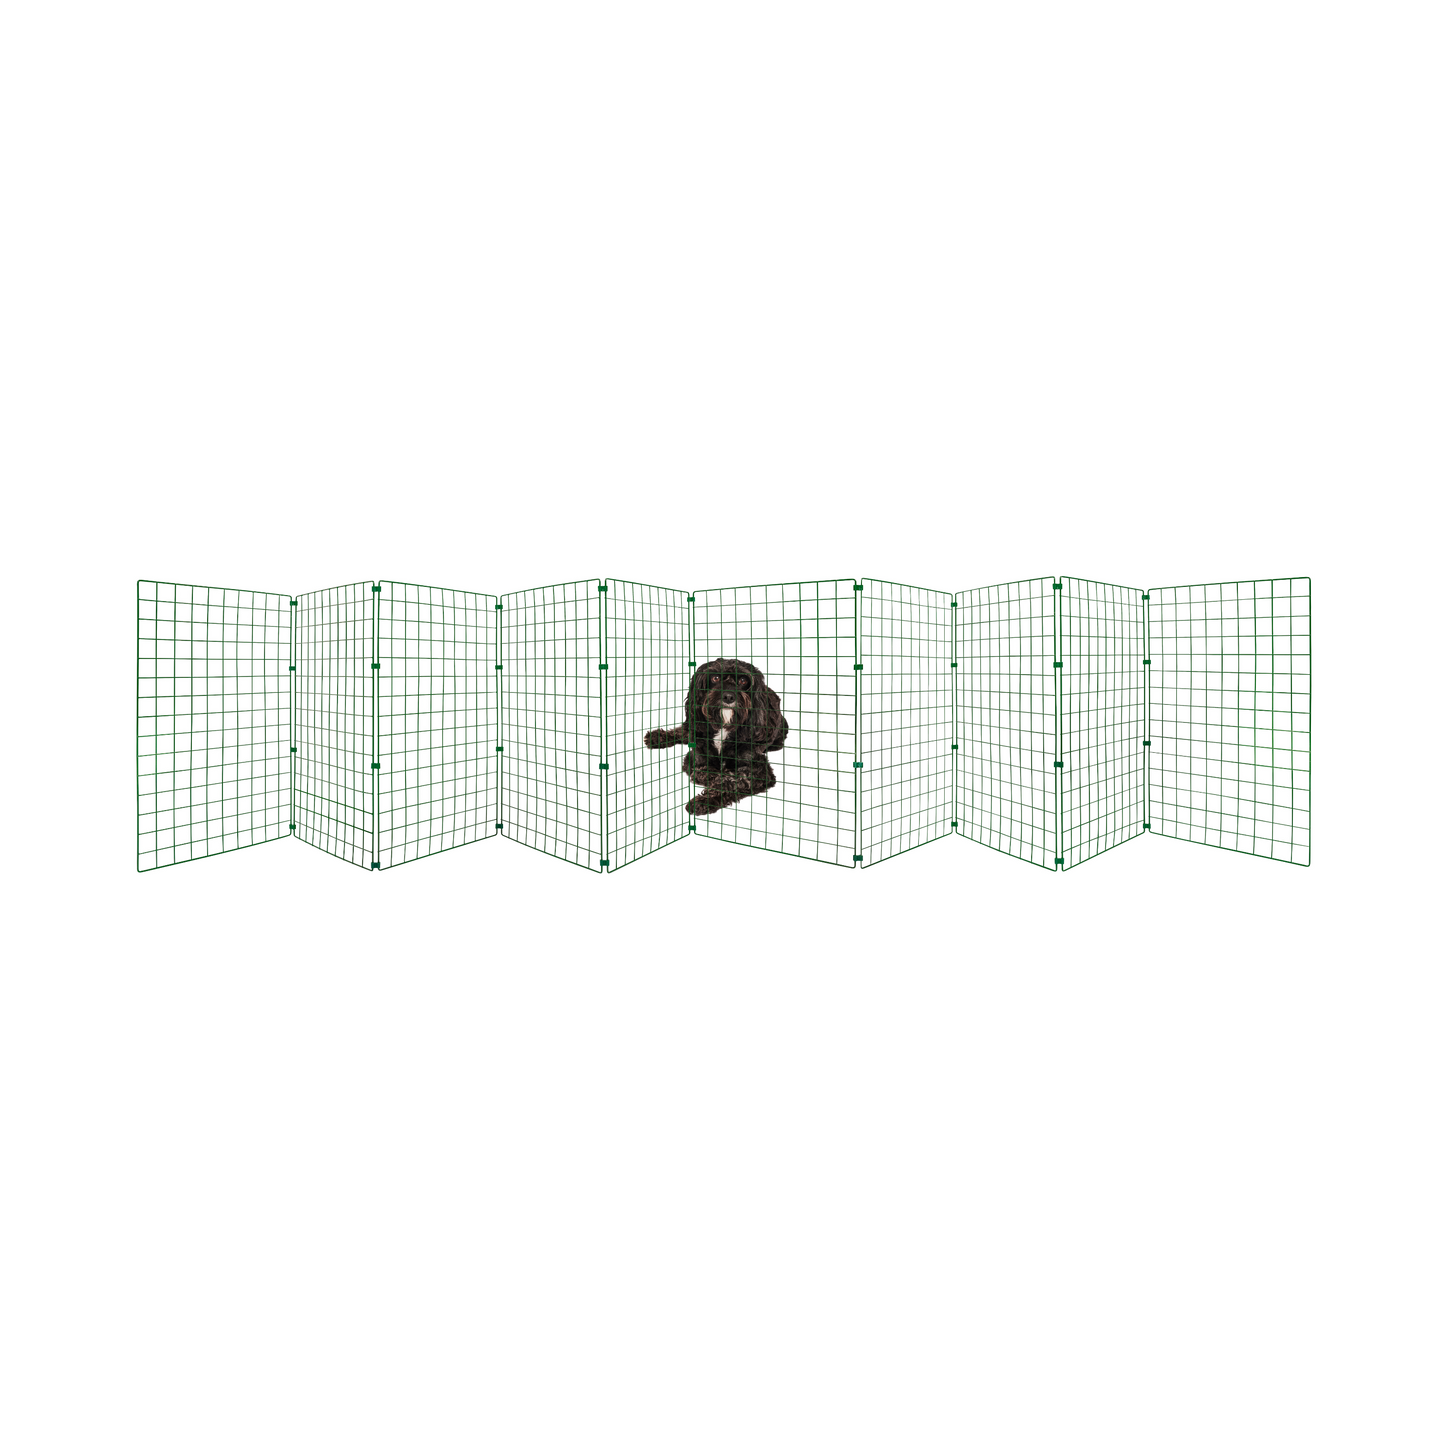 75cm High - PANELS & CLIPS ONLY - To Extend a Dog Fence - (50mm x 50mm Mesh)